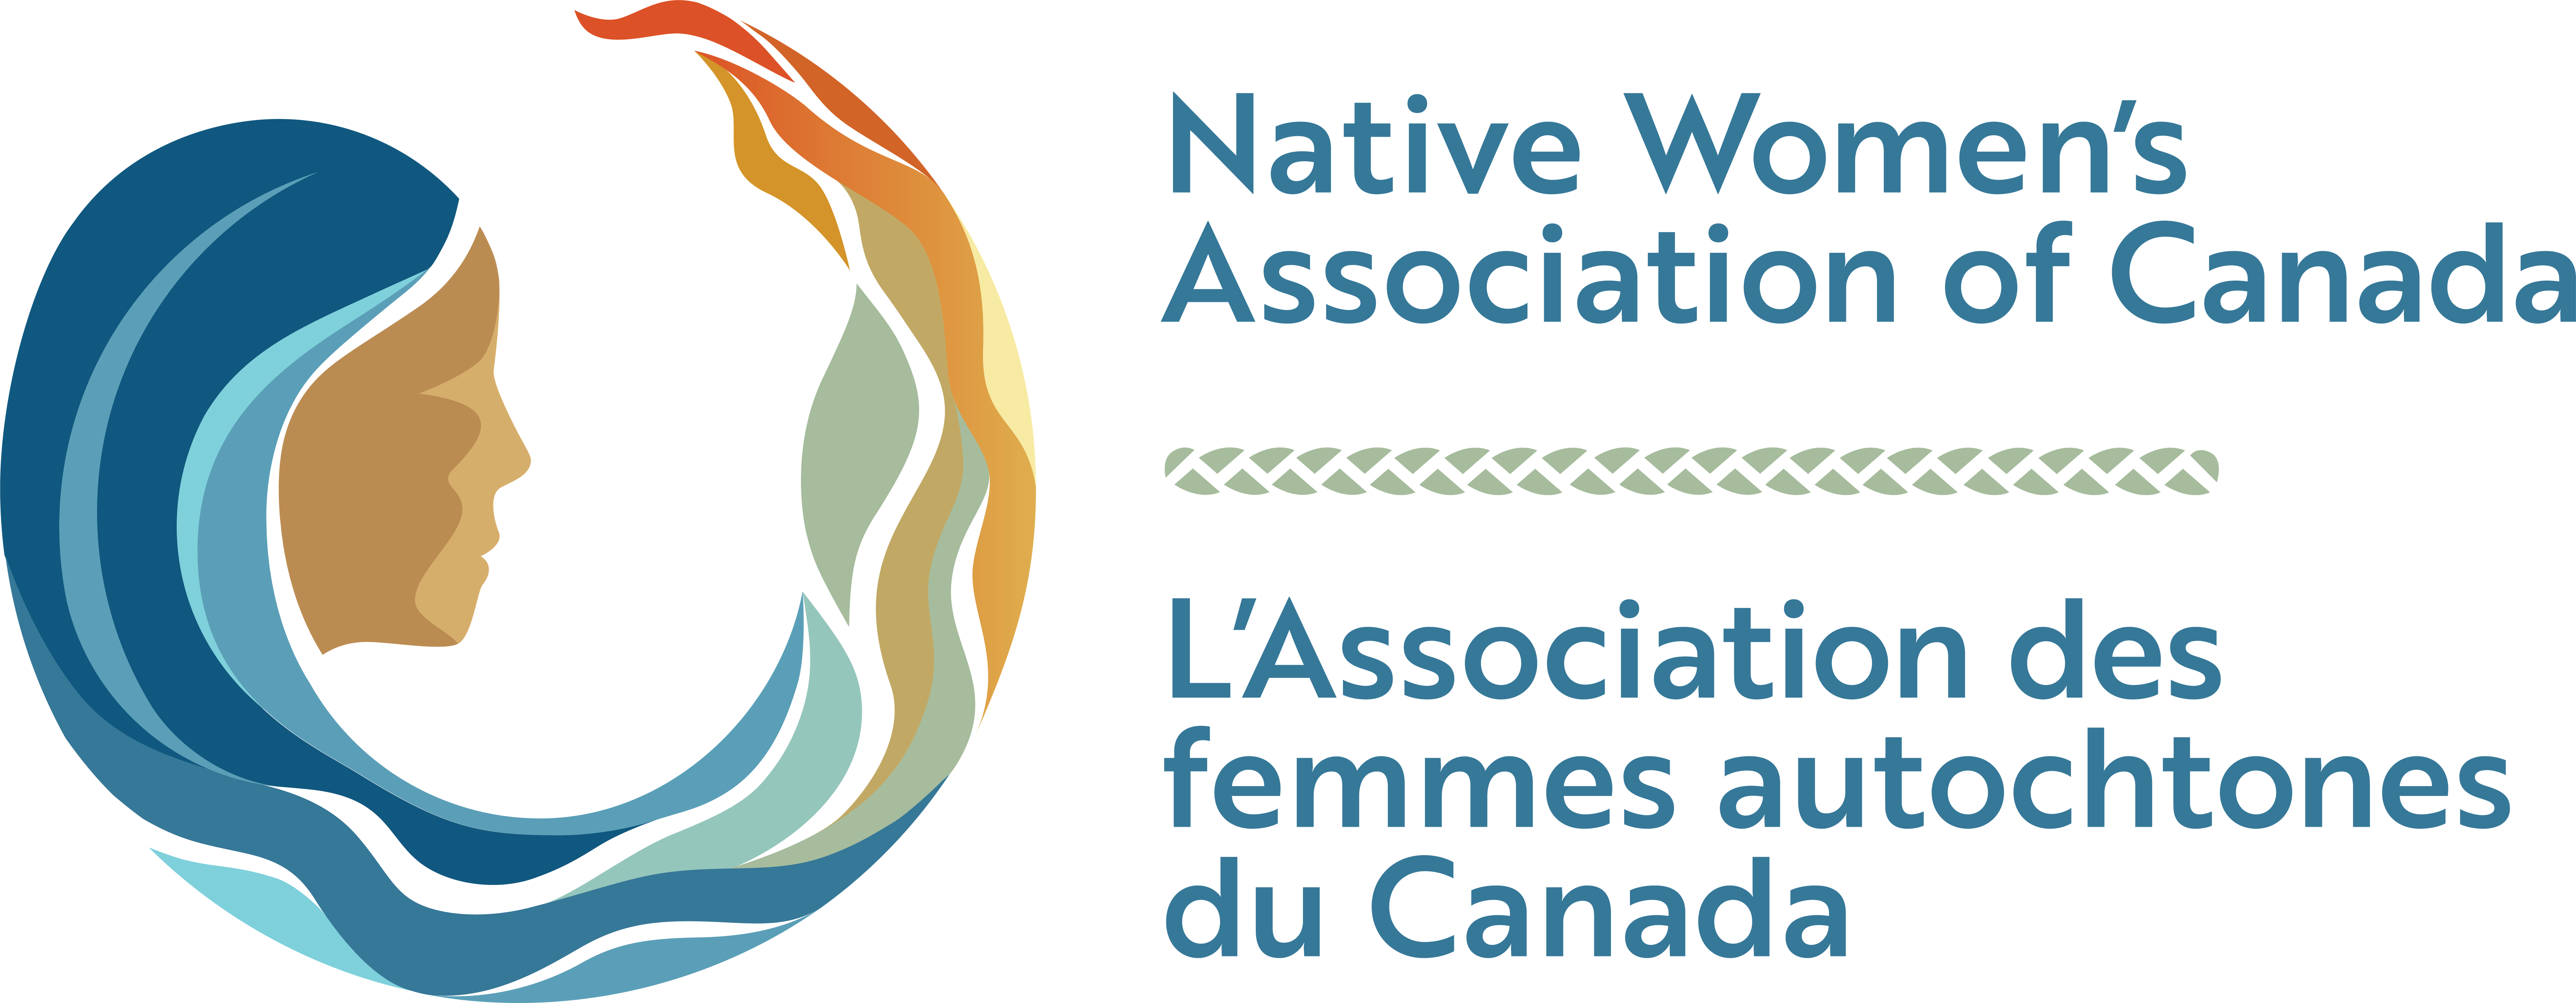 Native Women’s Association of Canada, Tuesday, December 3, 2019, Press release picture